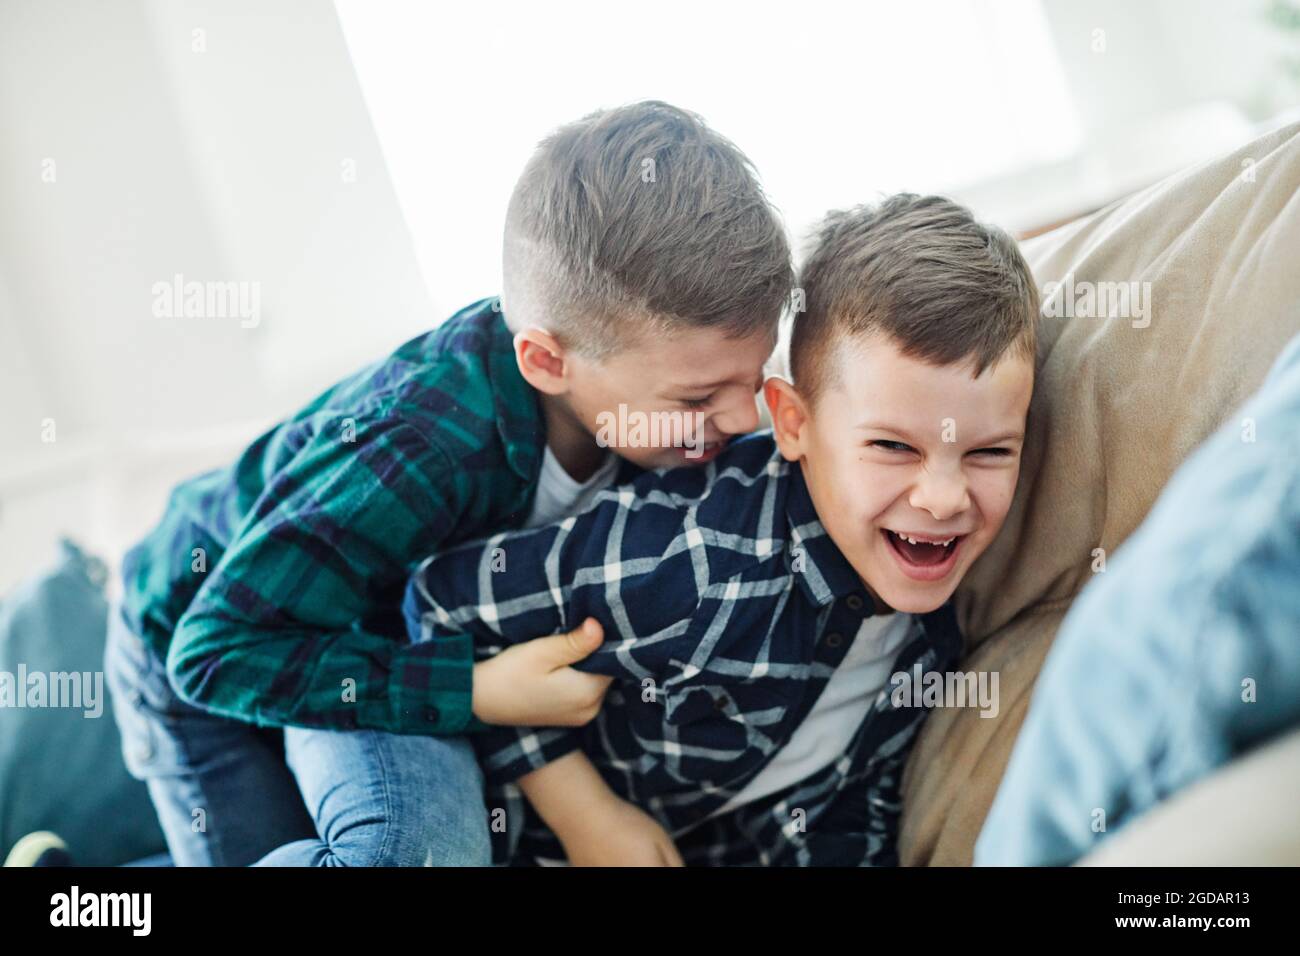 child brother friend having fun playing laughing happy kid Stock Photo